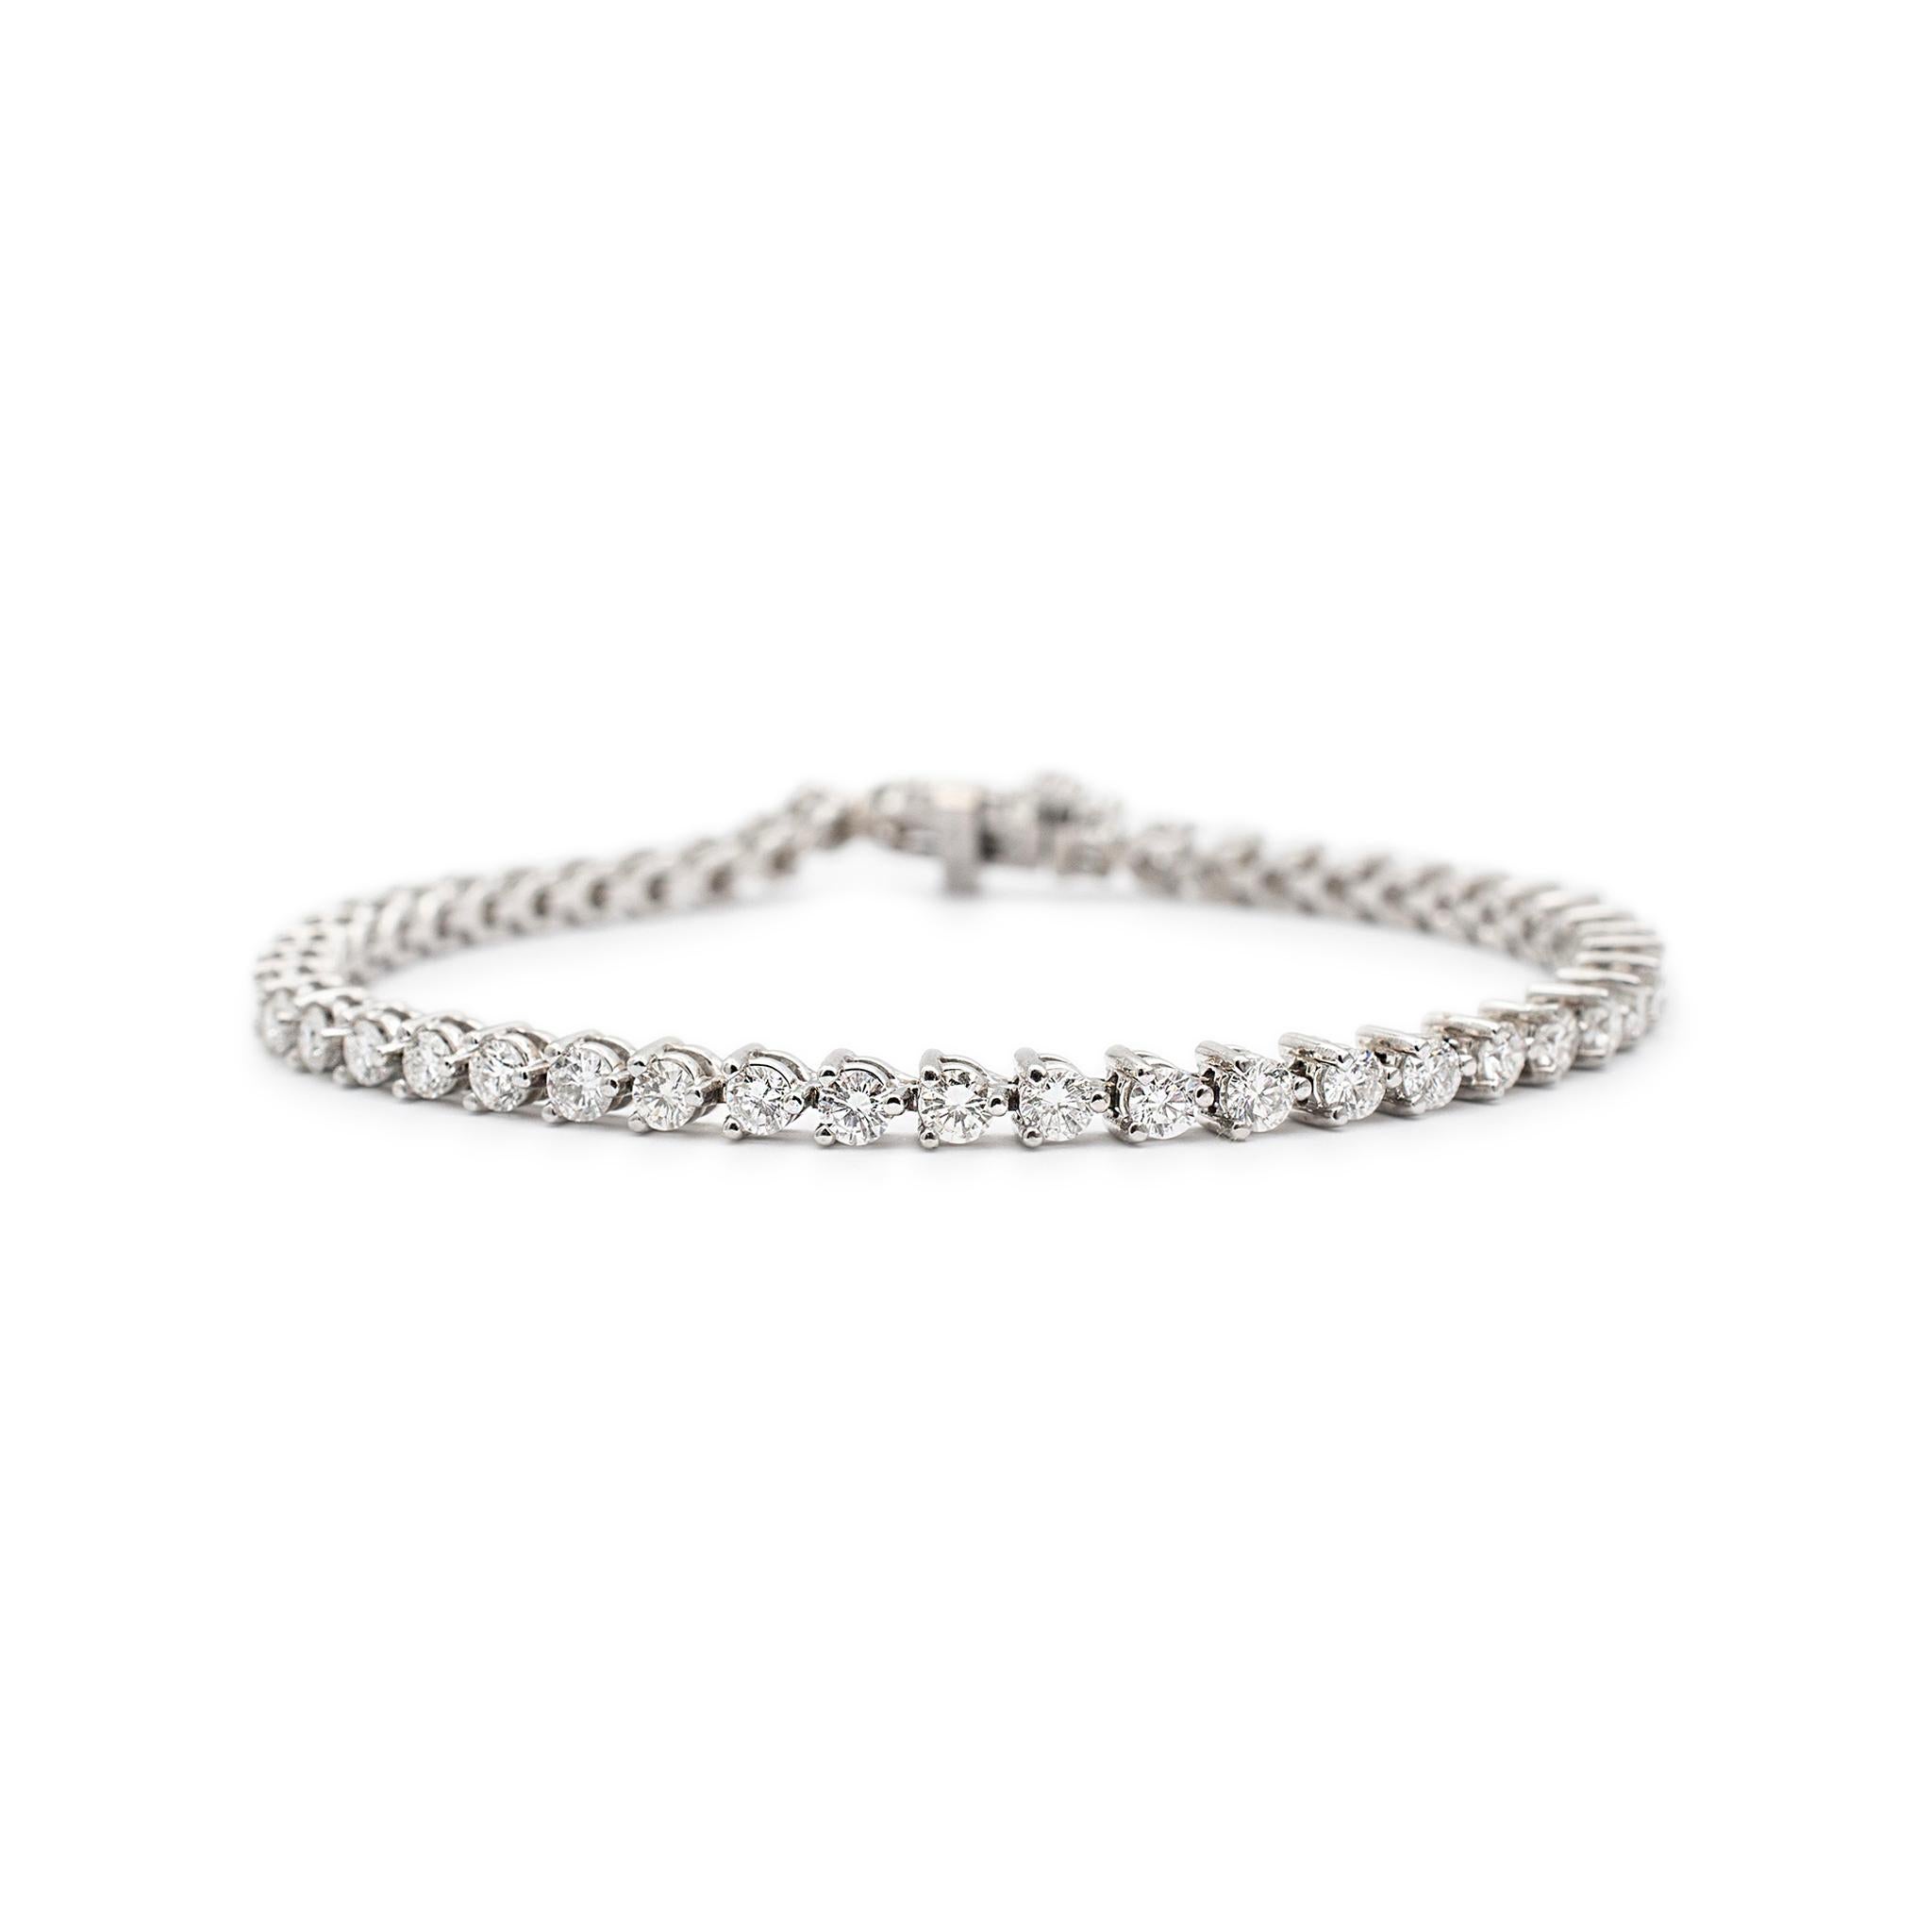 One lady's custom made polished 14K white gold, diamond tennis bracelet. The bracelet is 3.80mm thick and measures approximately 7.00 inches in length by 2.92mm in width and weighs a total of 9.82 grams. Engraved with 